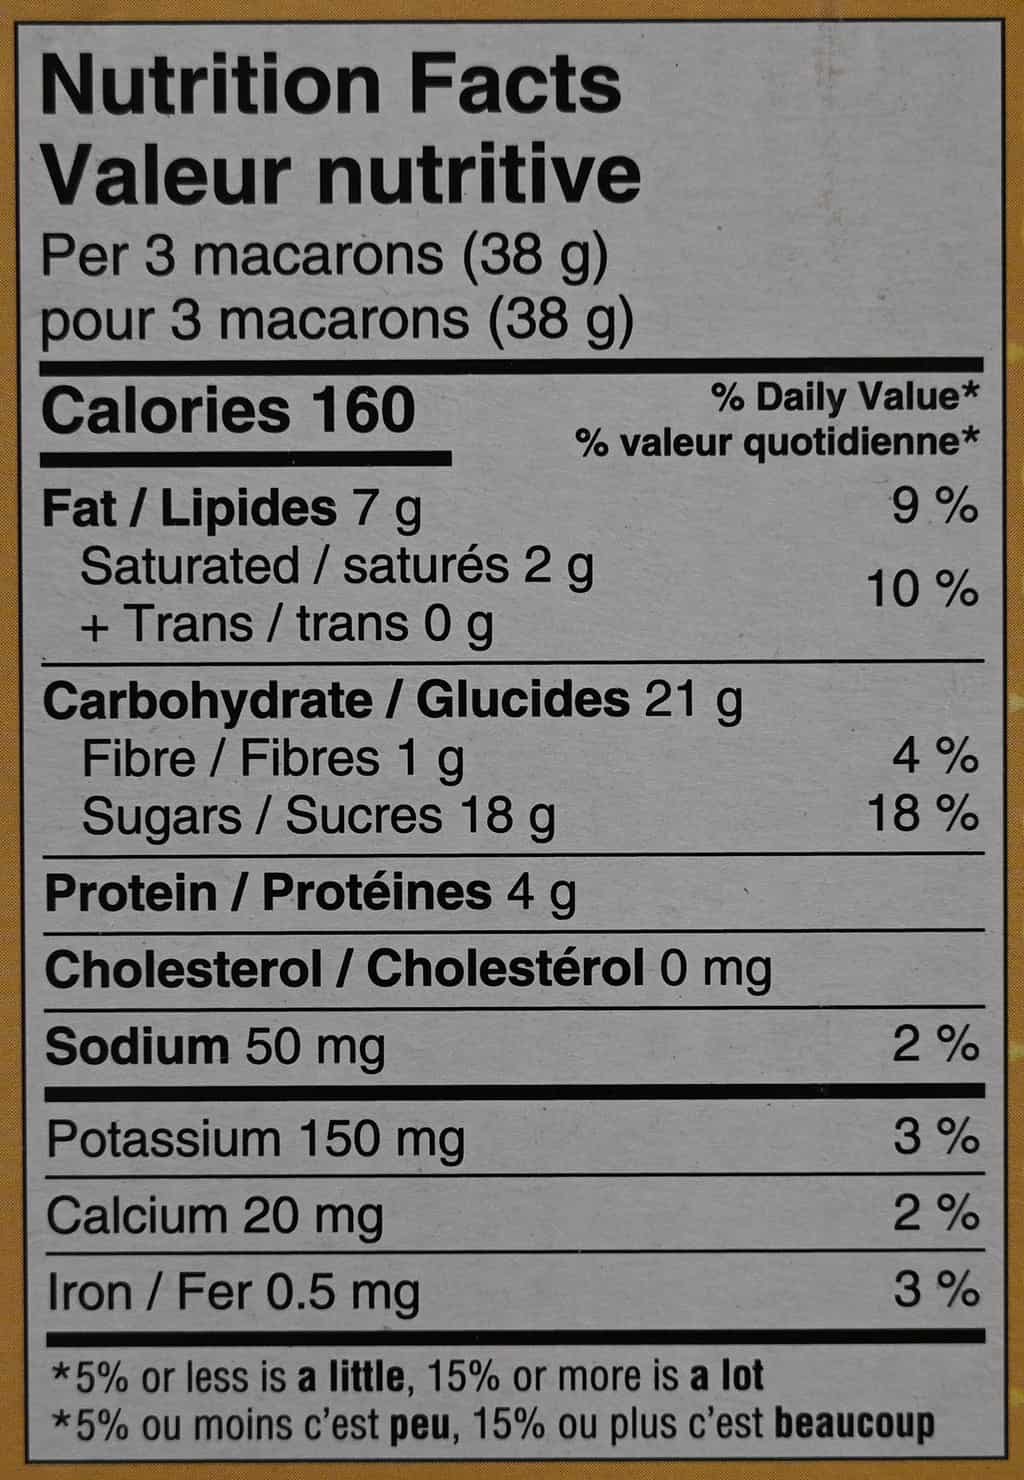 The nutrition facts for the Costco macarons. 